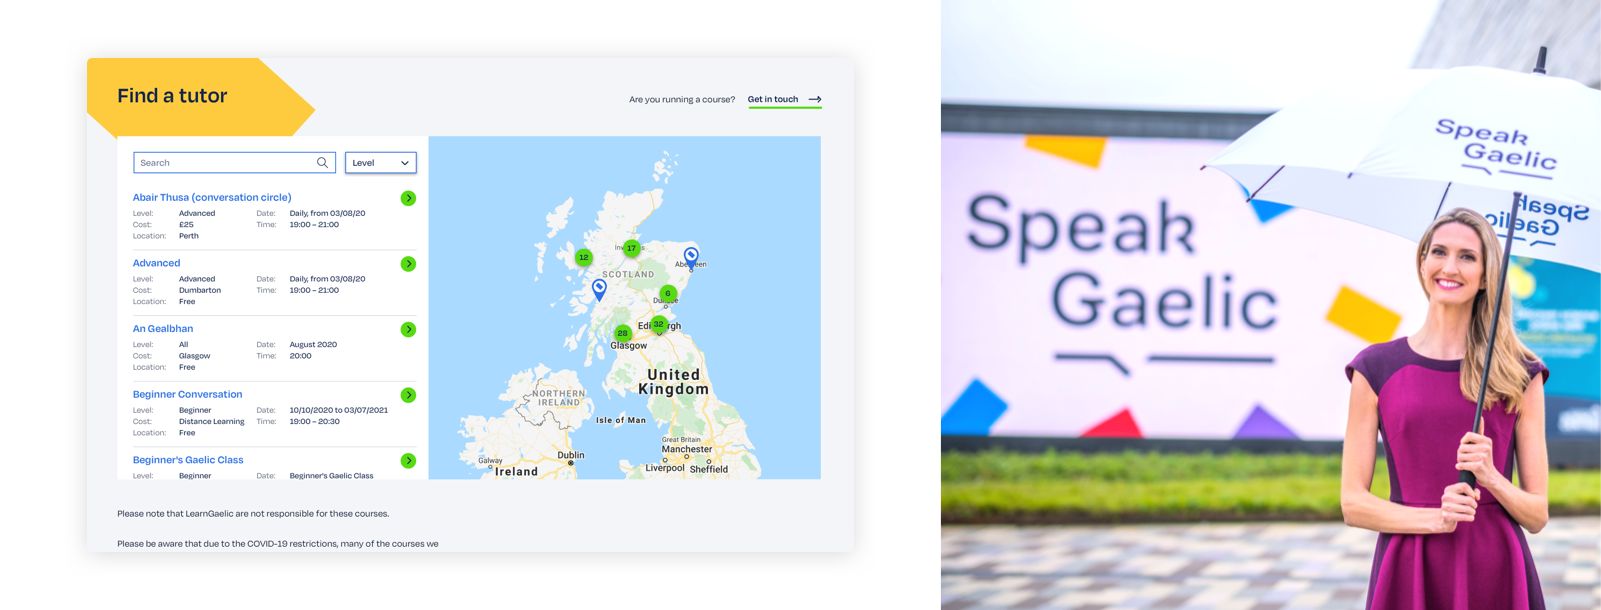 A tablet shows the SpeakGaelic map of Scotland which shows users where they can learn Gaelic. Learning centres and tutors’ locations are marked with a green pin. To the right is a photograph od Joy Dunlop who holds an open SpeakGaelic branded umbrella